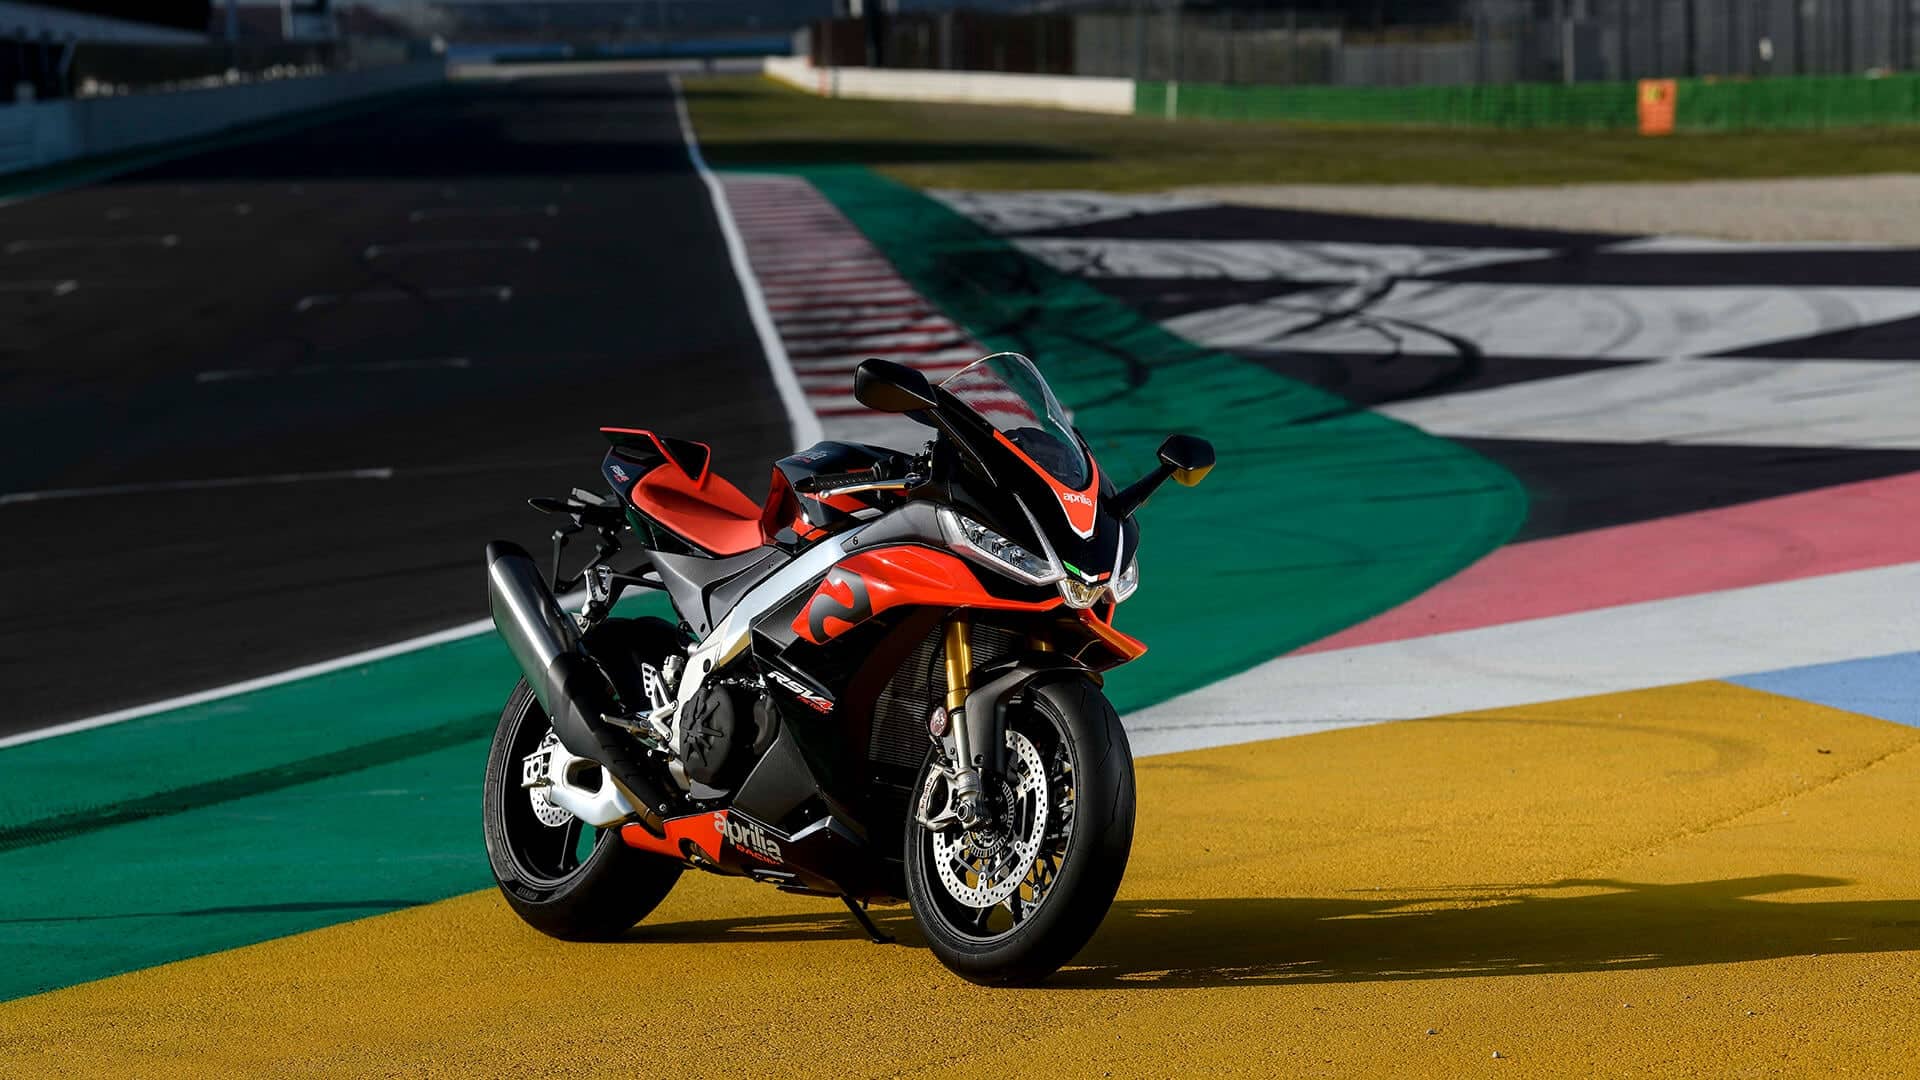 Aprilia RSV4 1100 Factory new one of the top 10 fastest bikes in the world